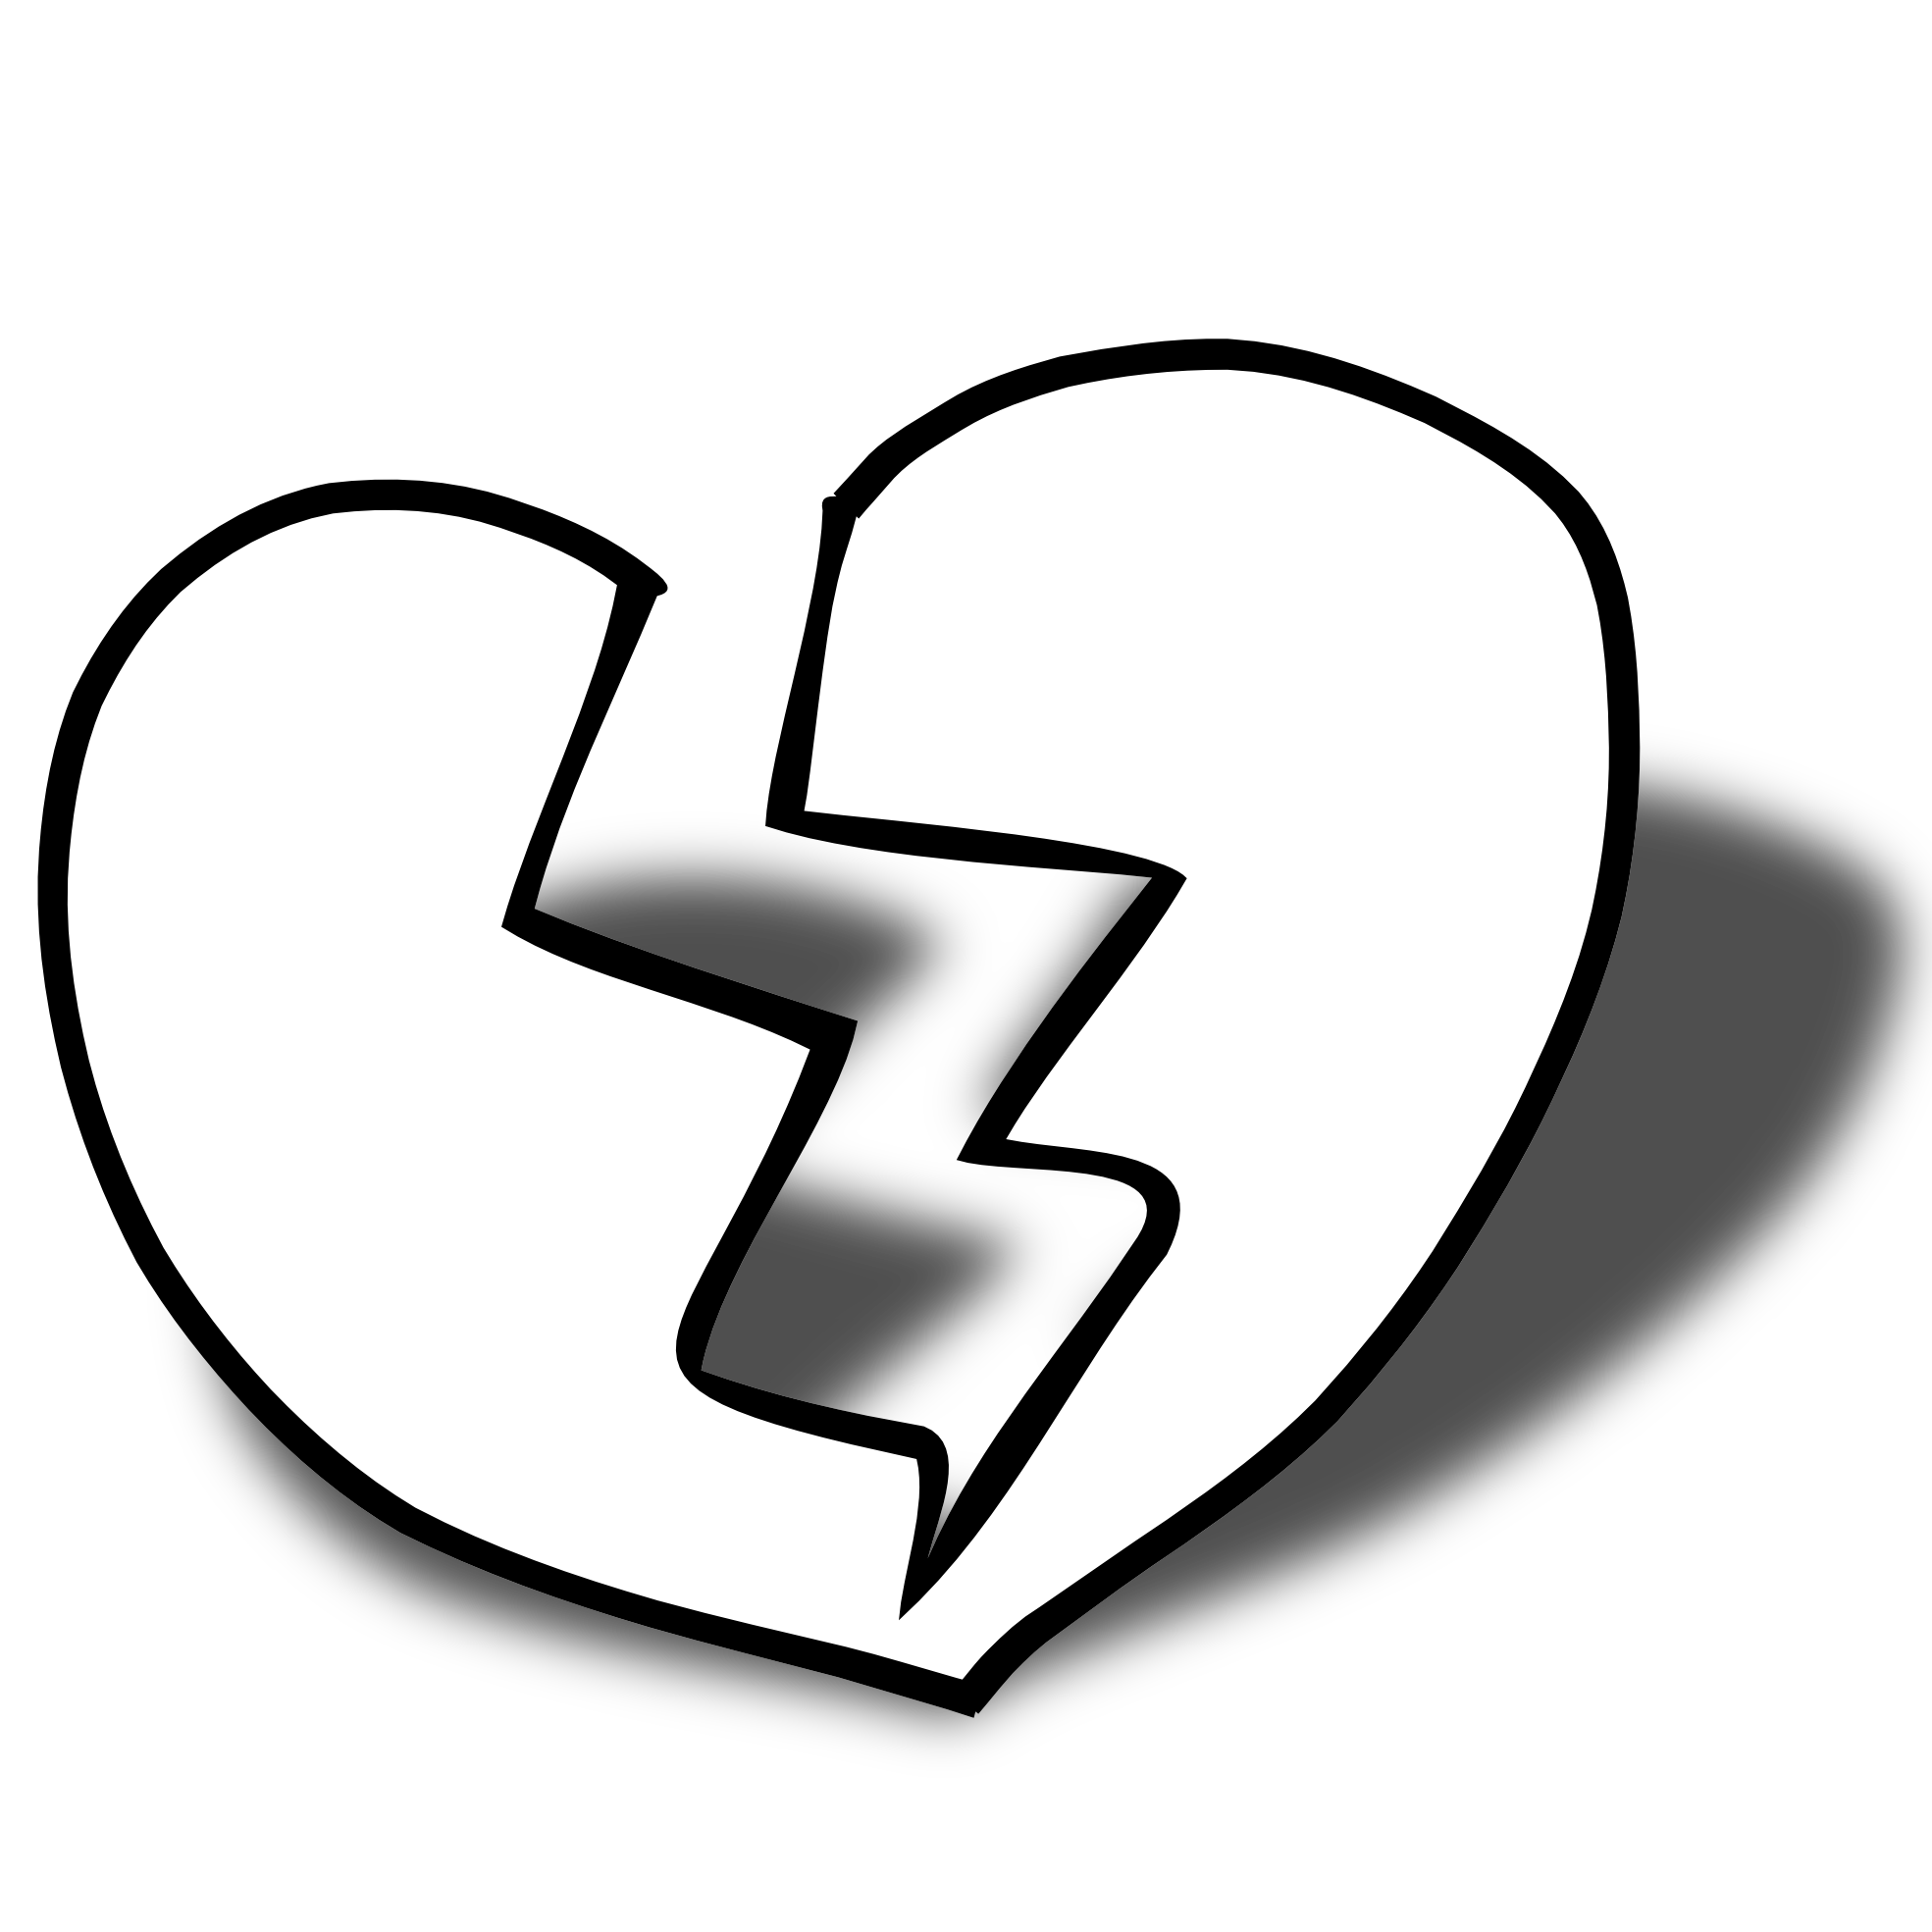 Double heart three hearts clipart black and white free